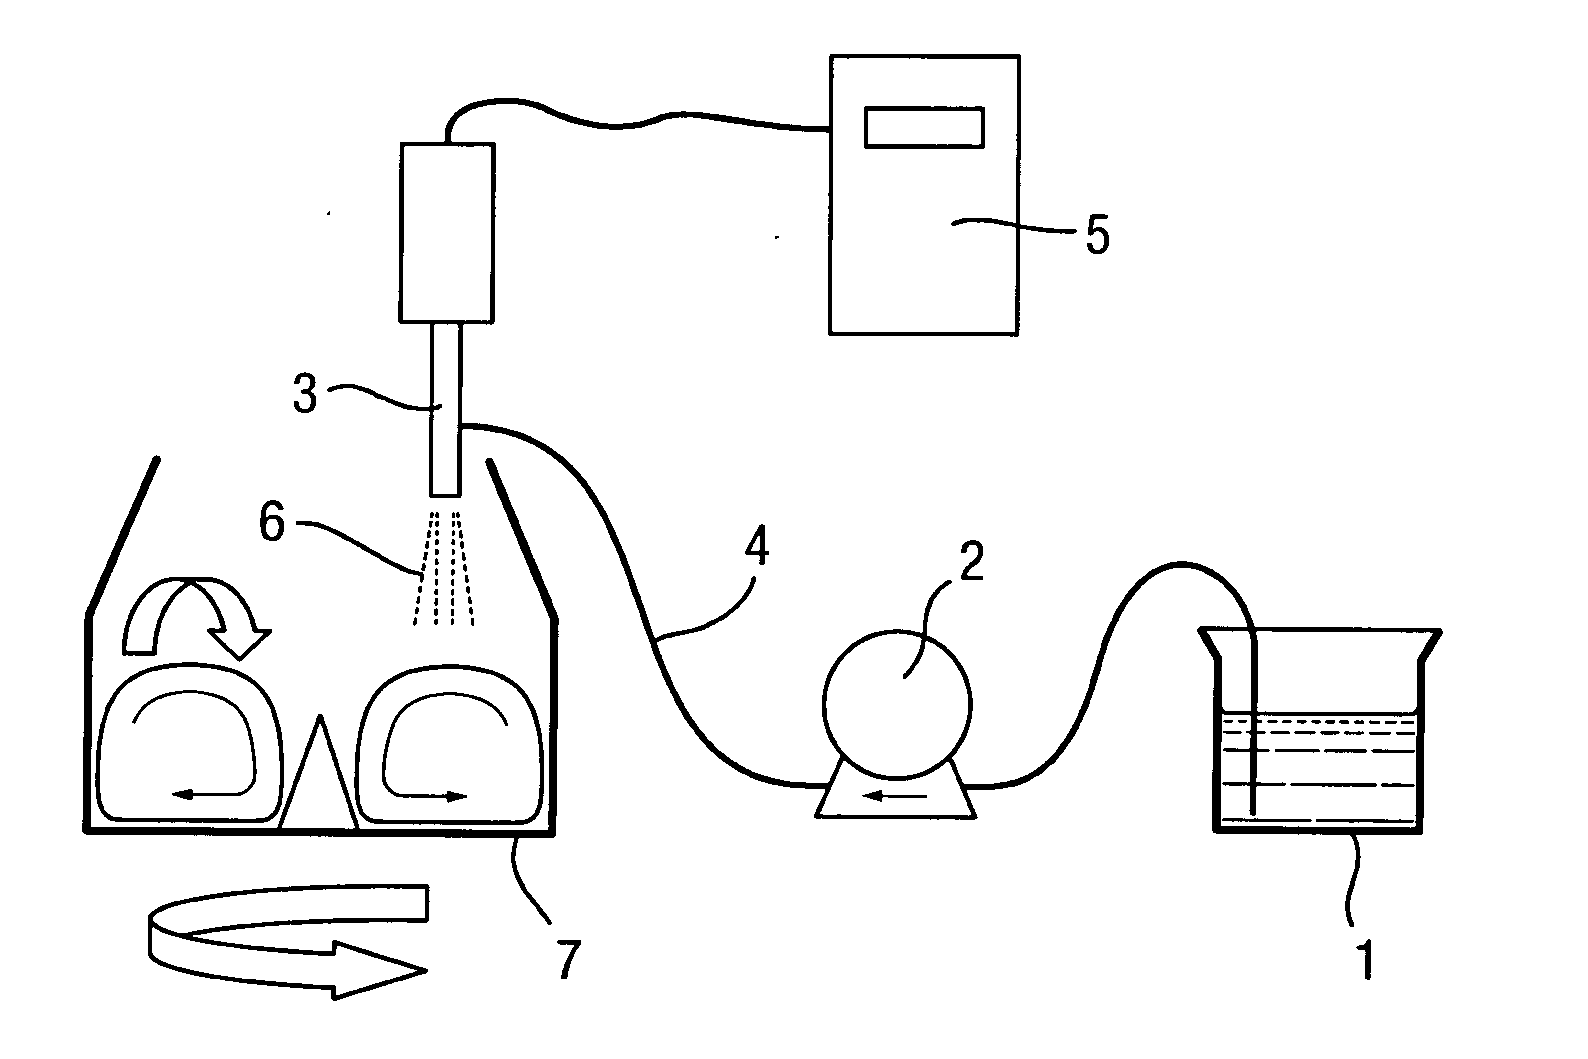 Wet Granulation System Comprising at Least One Ultrasonic Nozzle